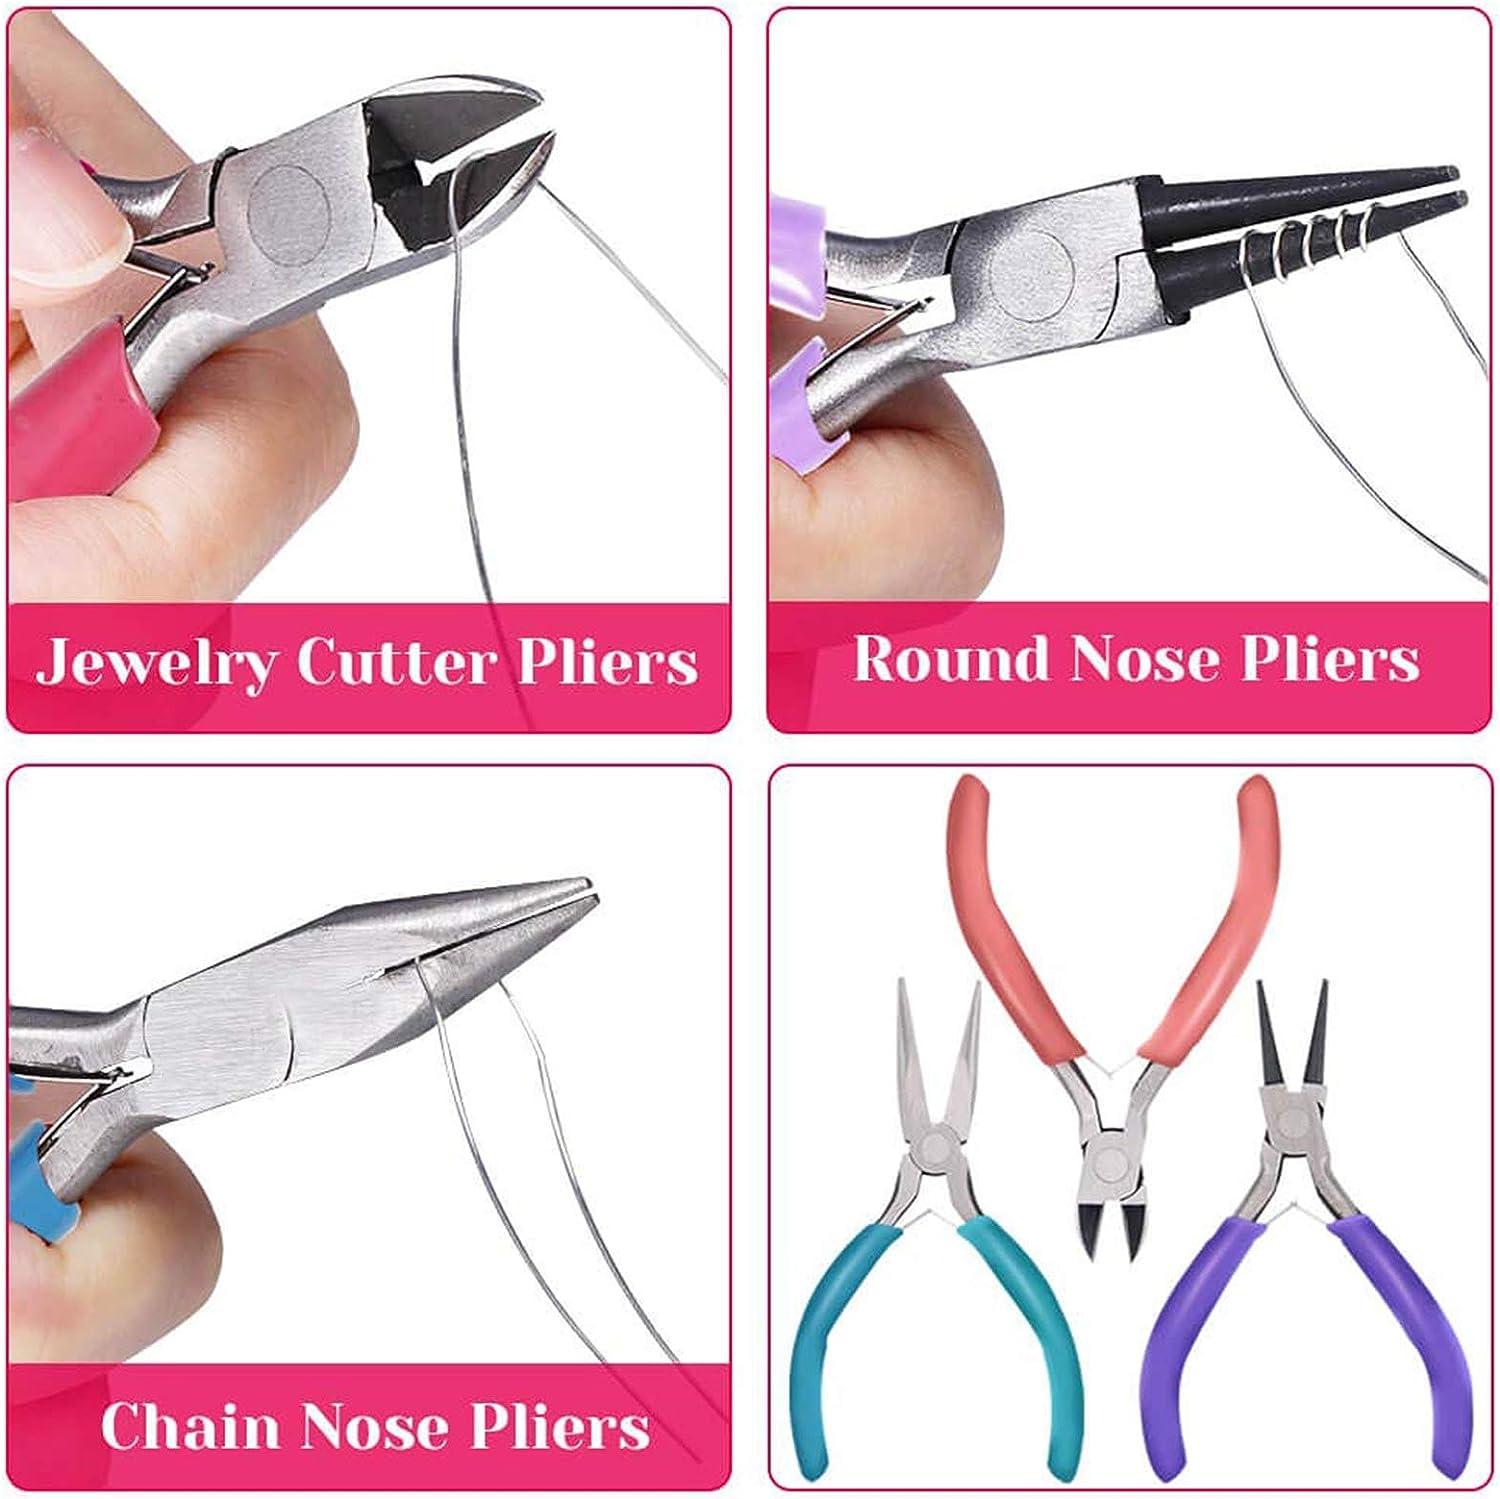 Anezus 7 Pcs Jewelry Pliers and Jewelry Beading Wire Tools Set Includes  Needle Nose Pliers Round Nose Pliers Wire Cutters and Craft Wire for  Jewelry Repair Making Supplies